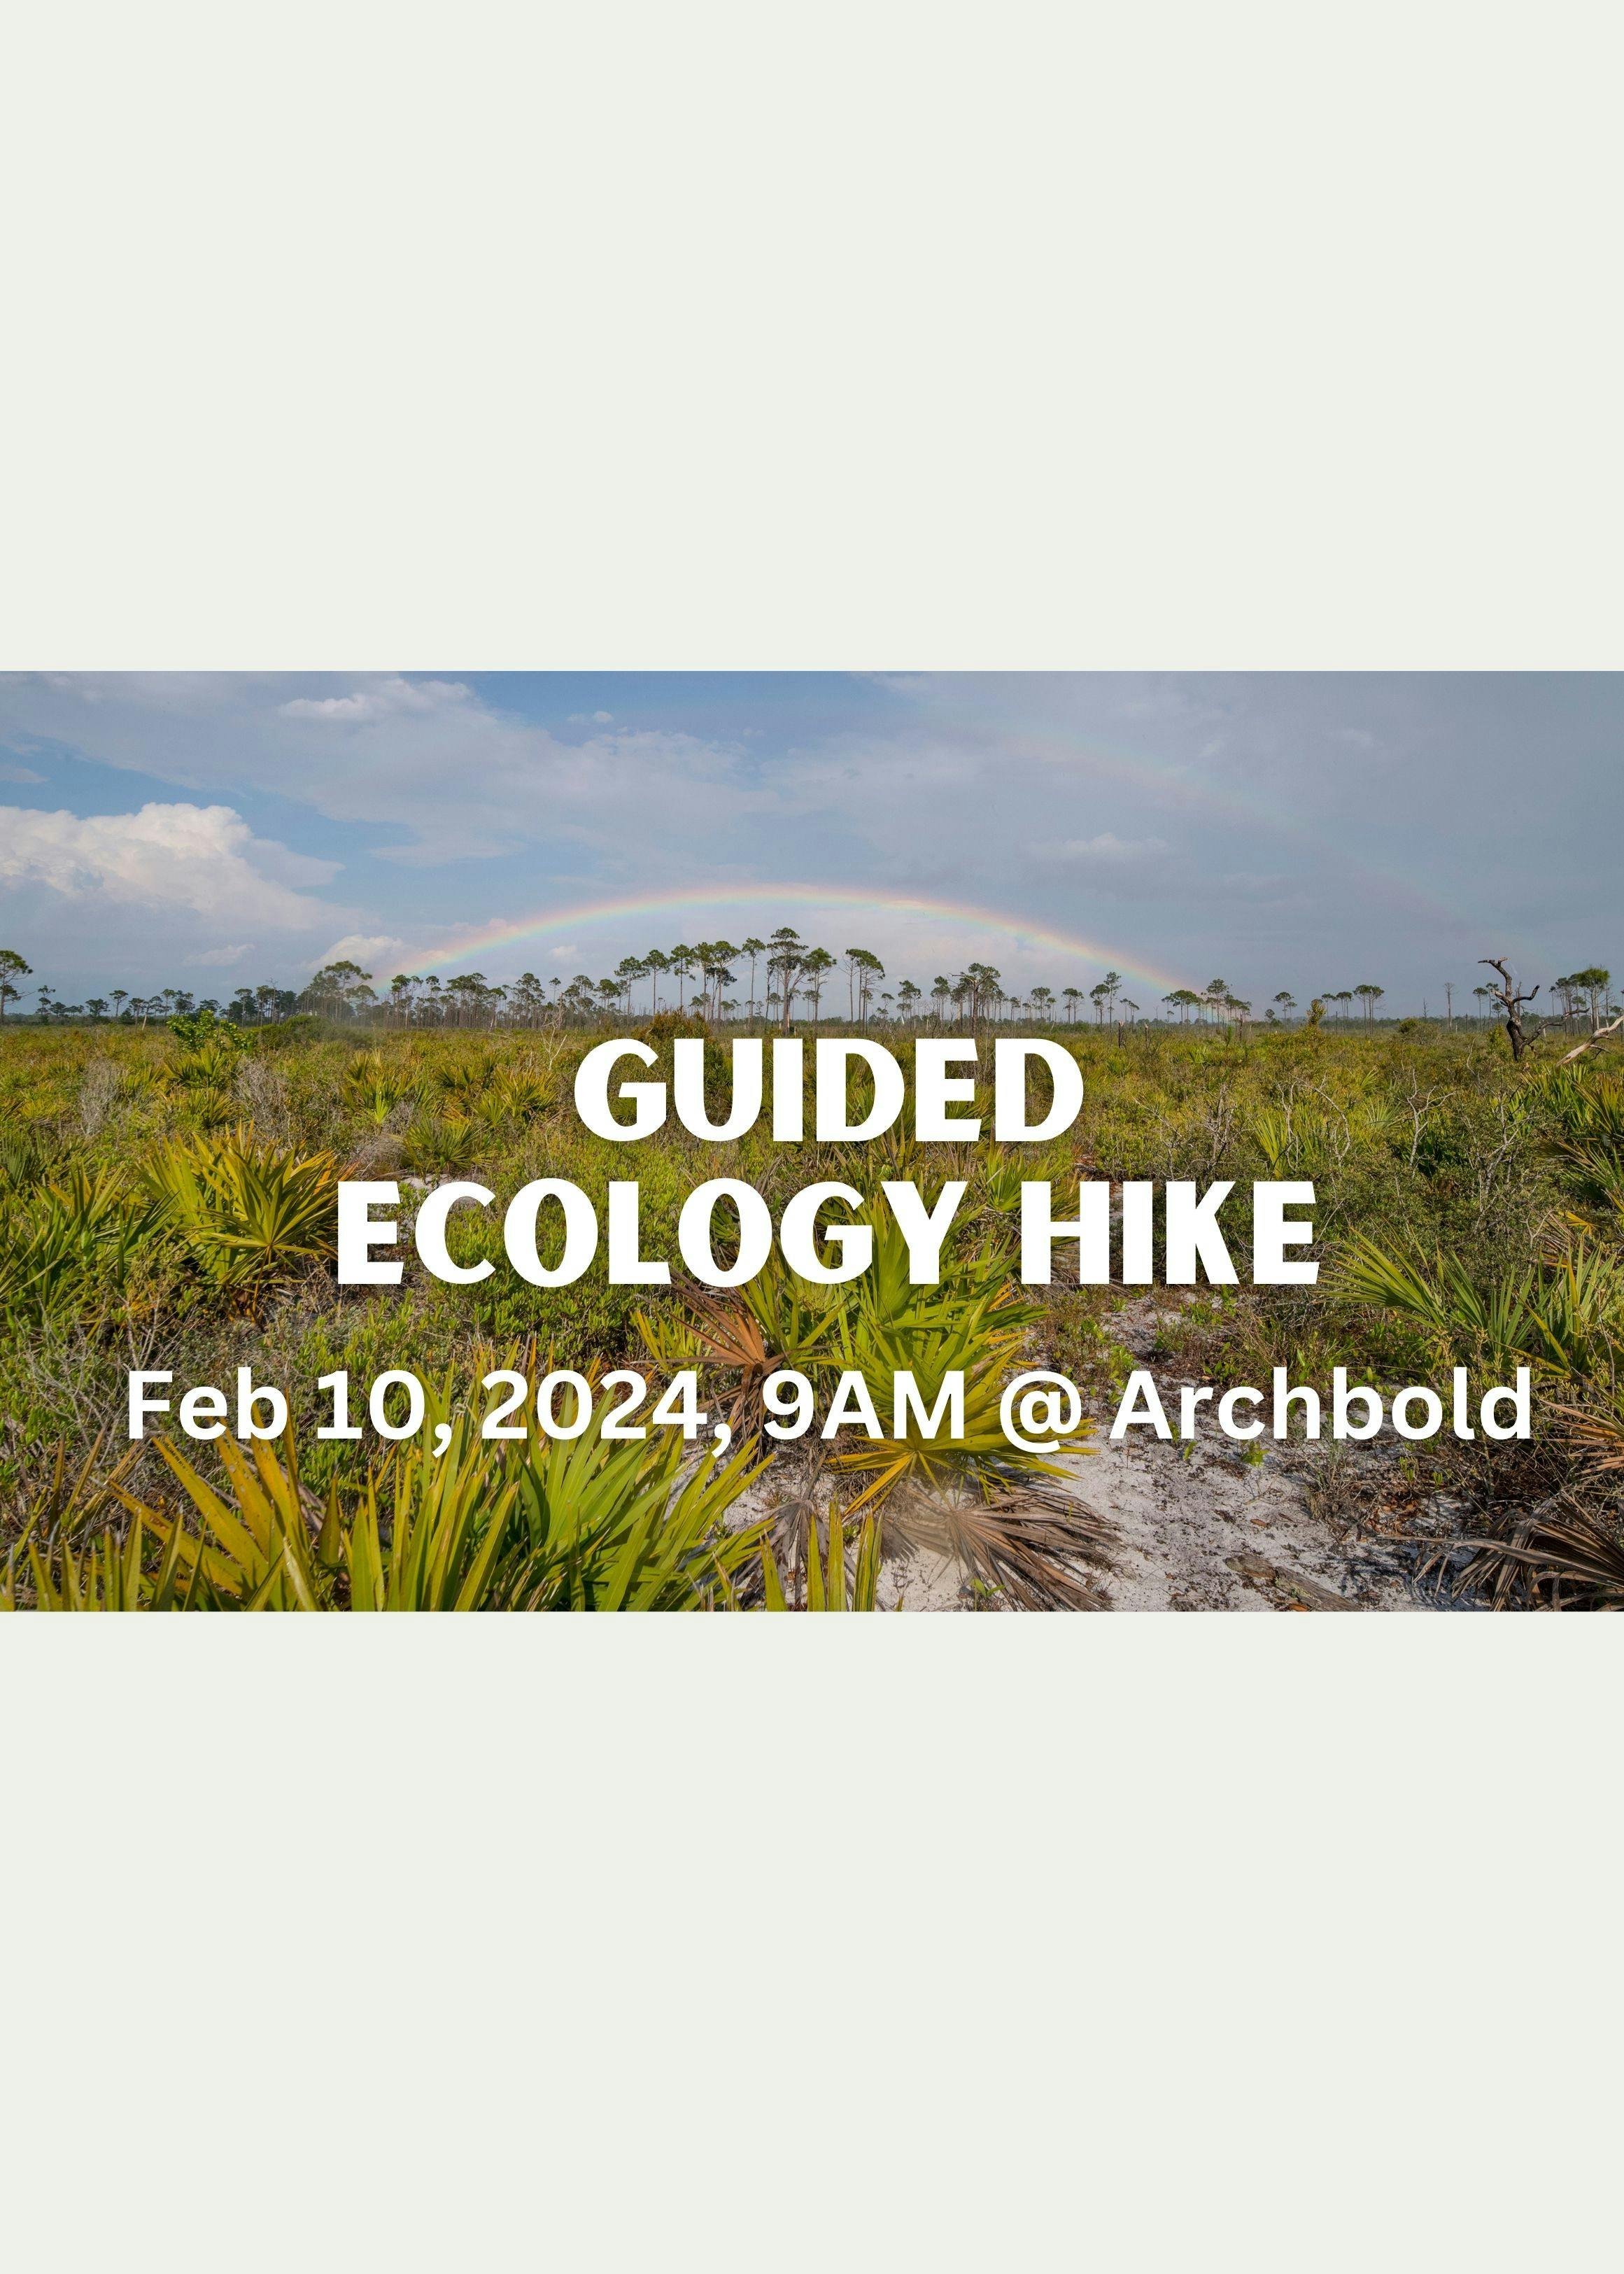 Guided Ecology Hike, Feb 10, 2024, 9AM at Archbold